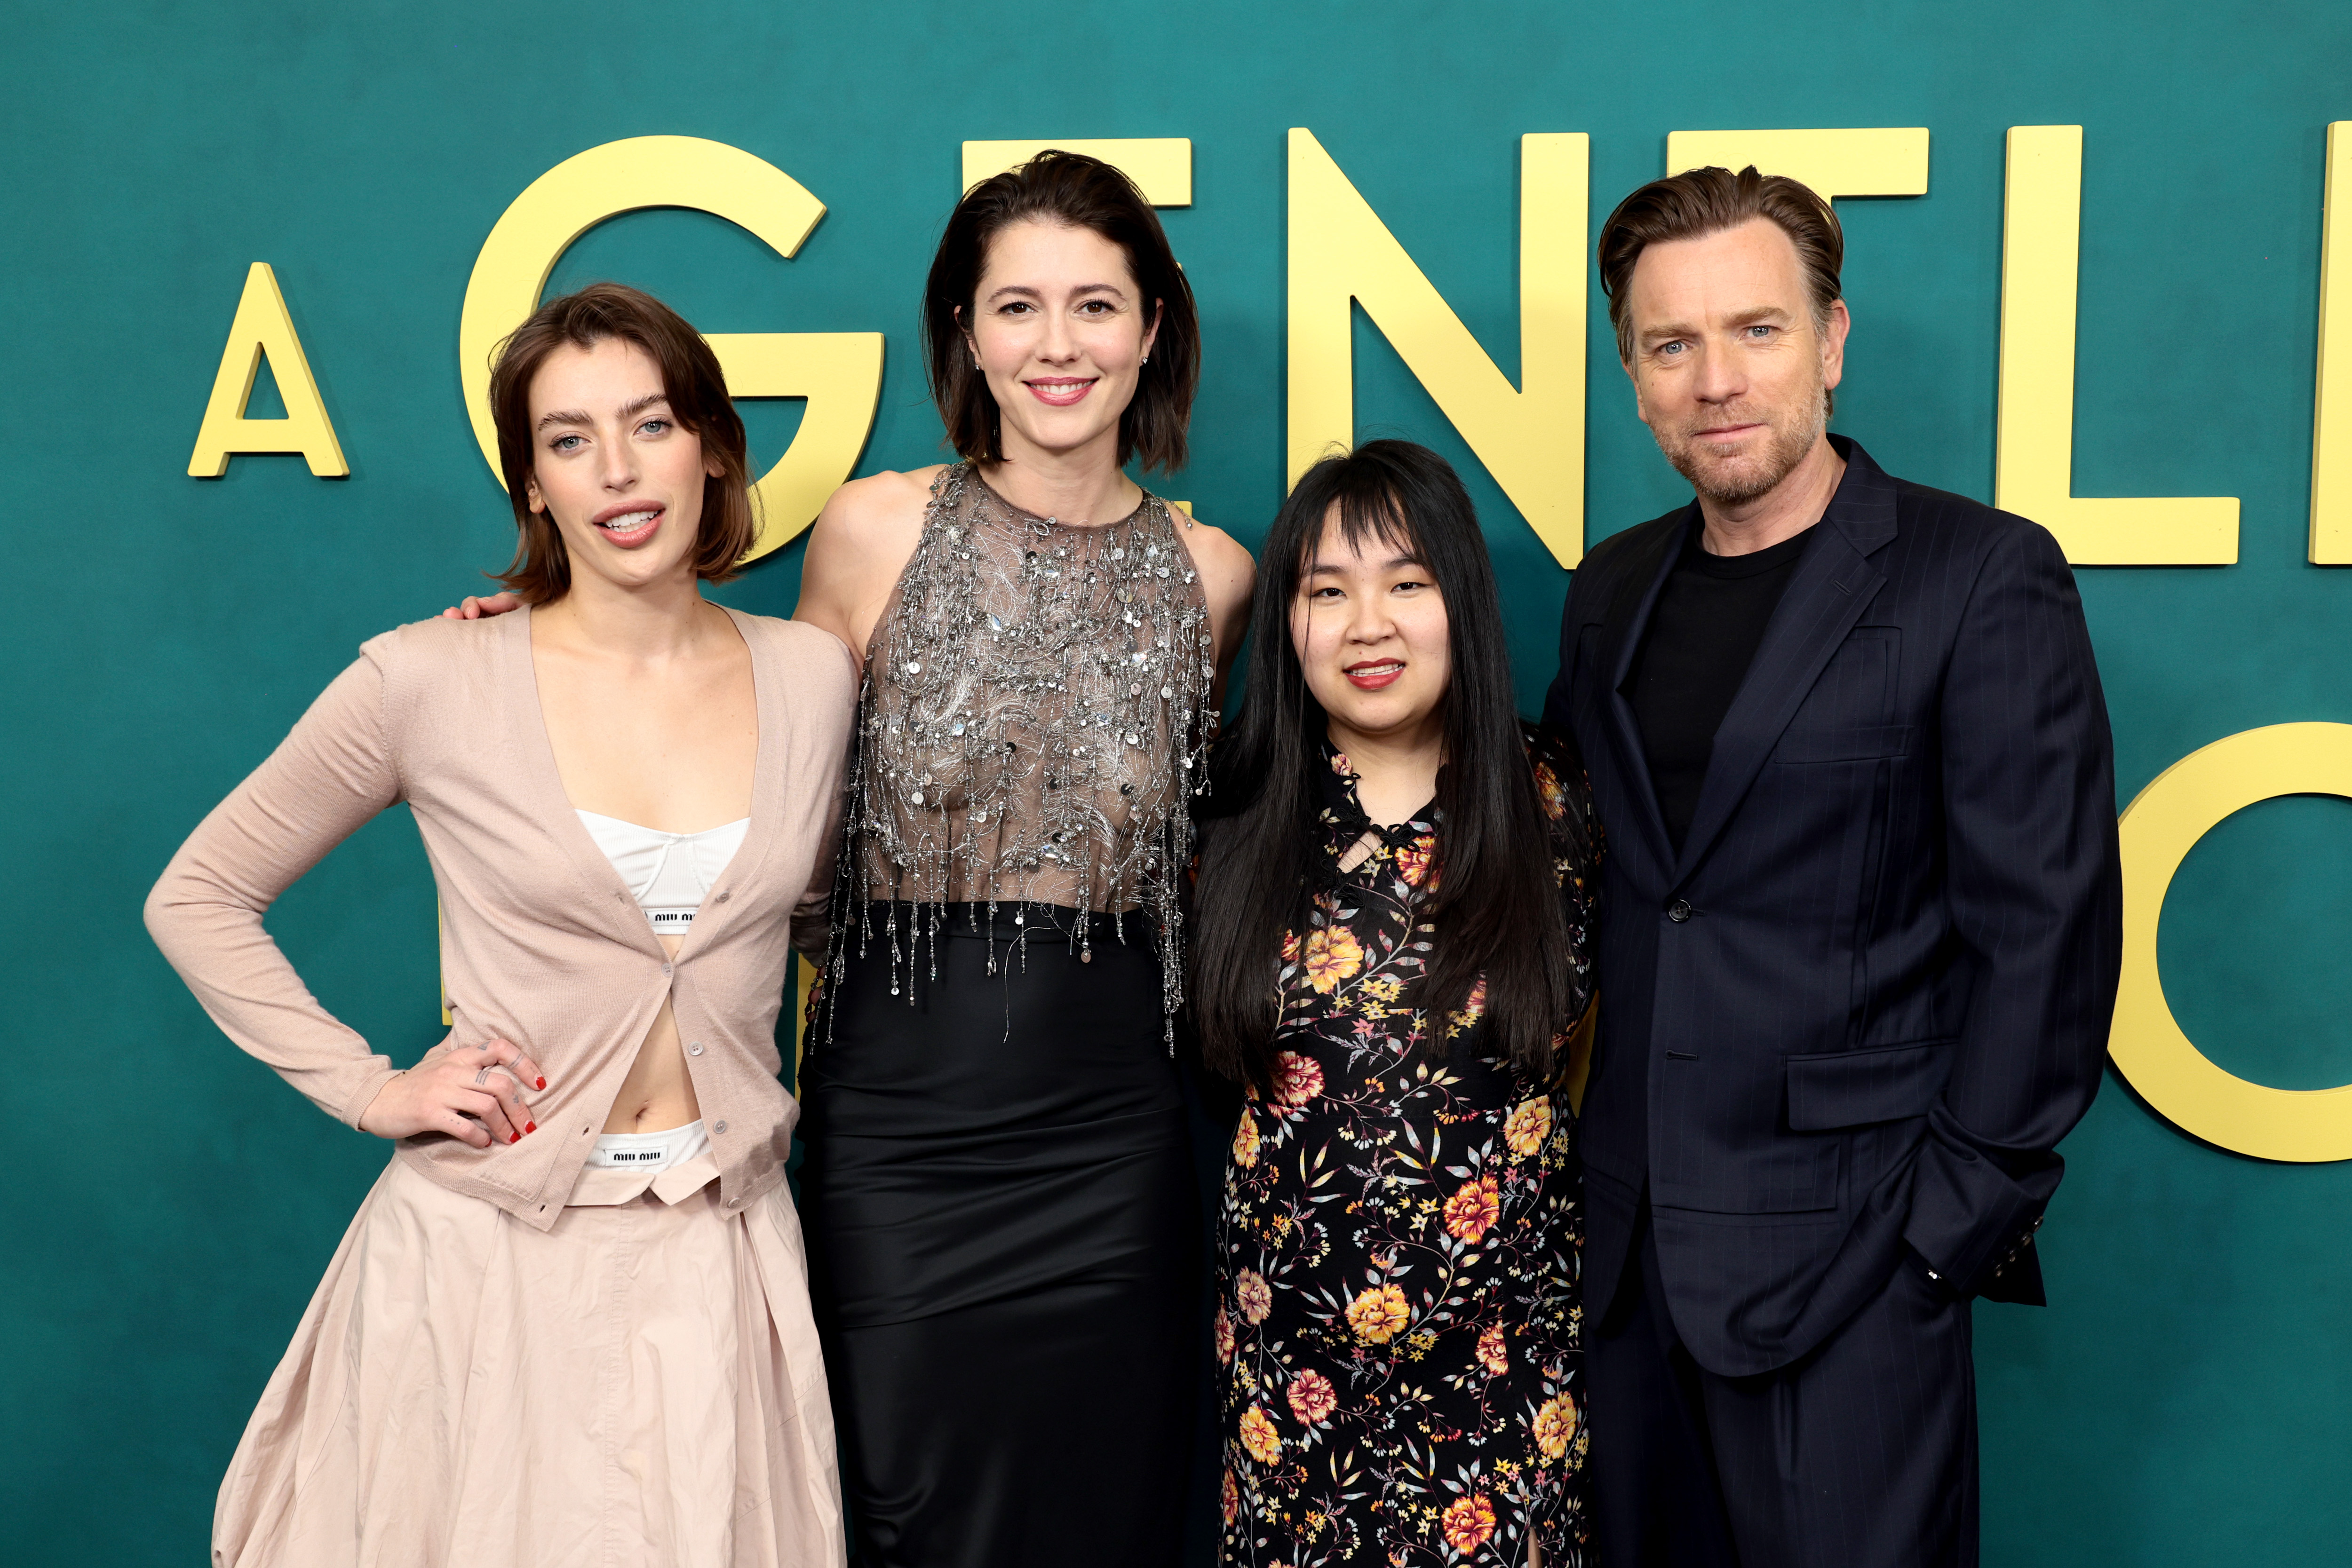 Ewan McGregor Goes to Event With Mary Elizabeth Winstead